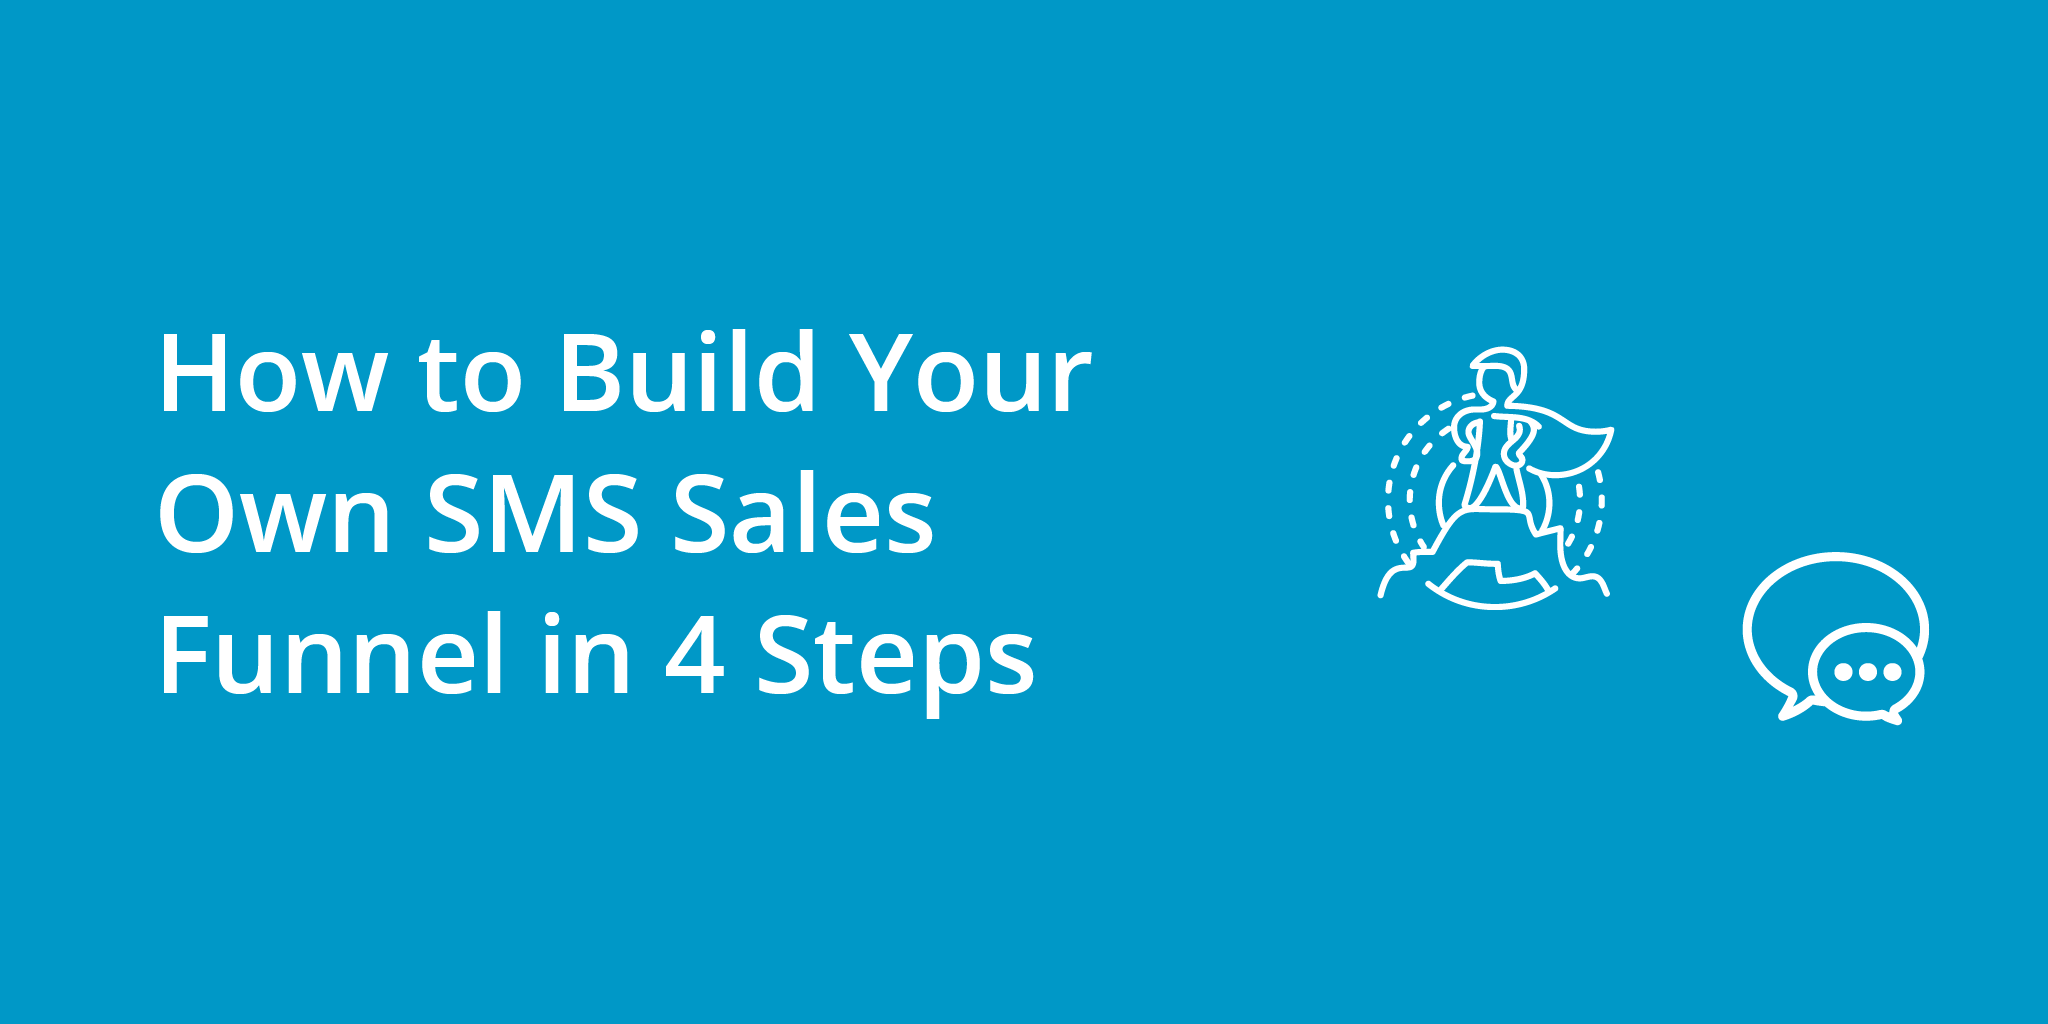 How to Build Your Own SMS Sales Funnel in 4 Steps | Telephones for business